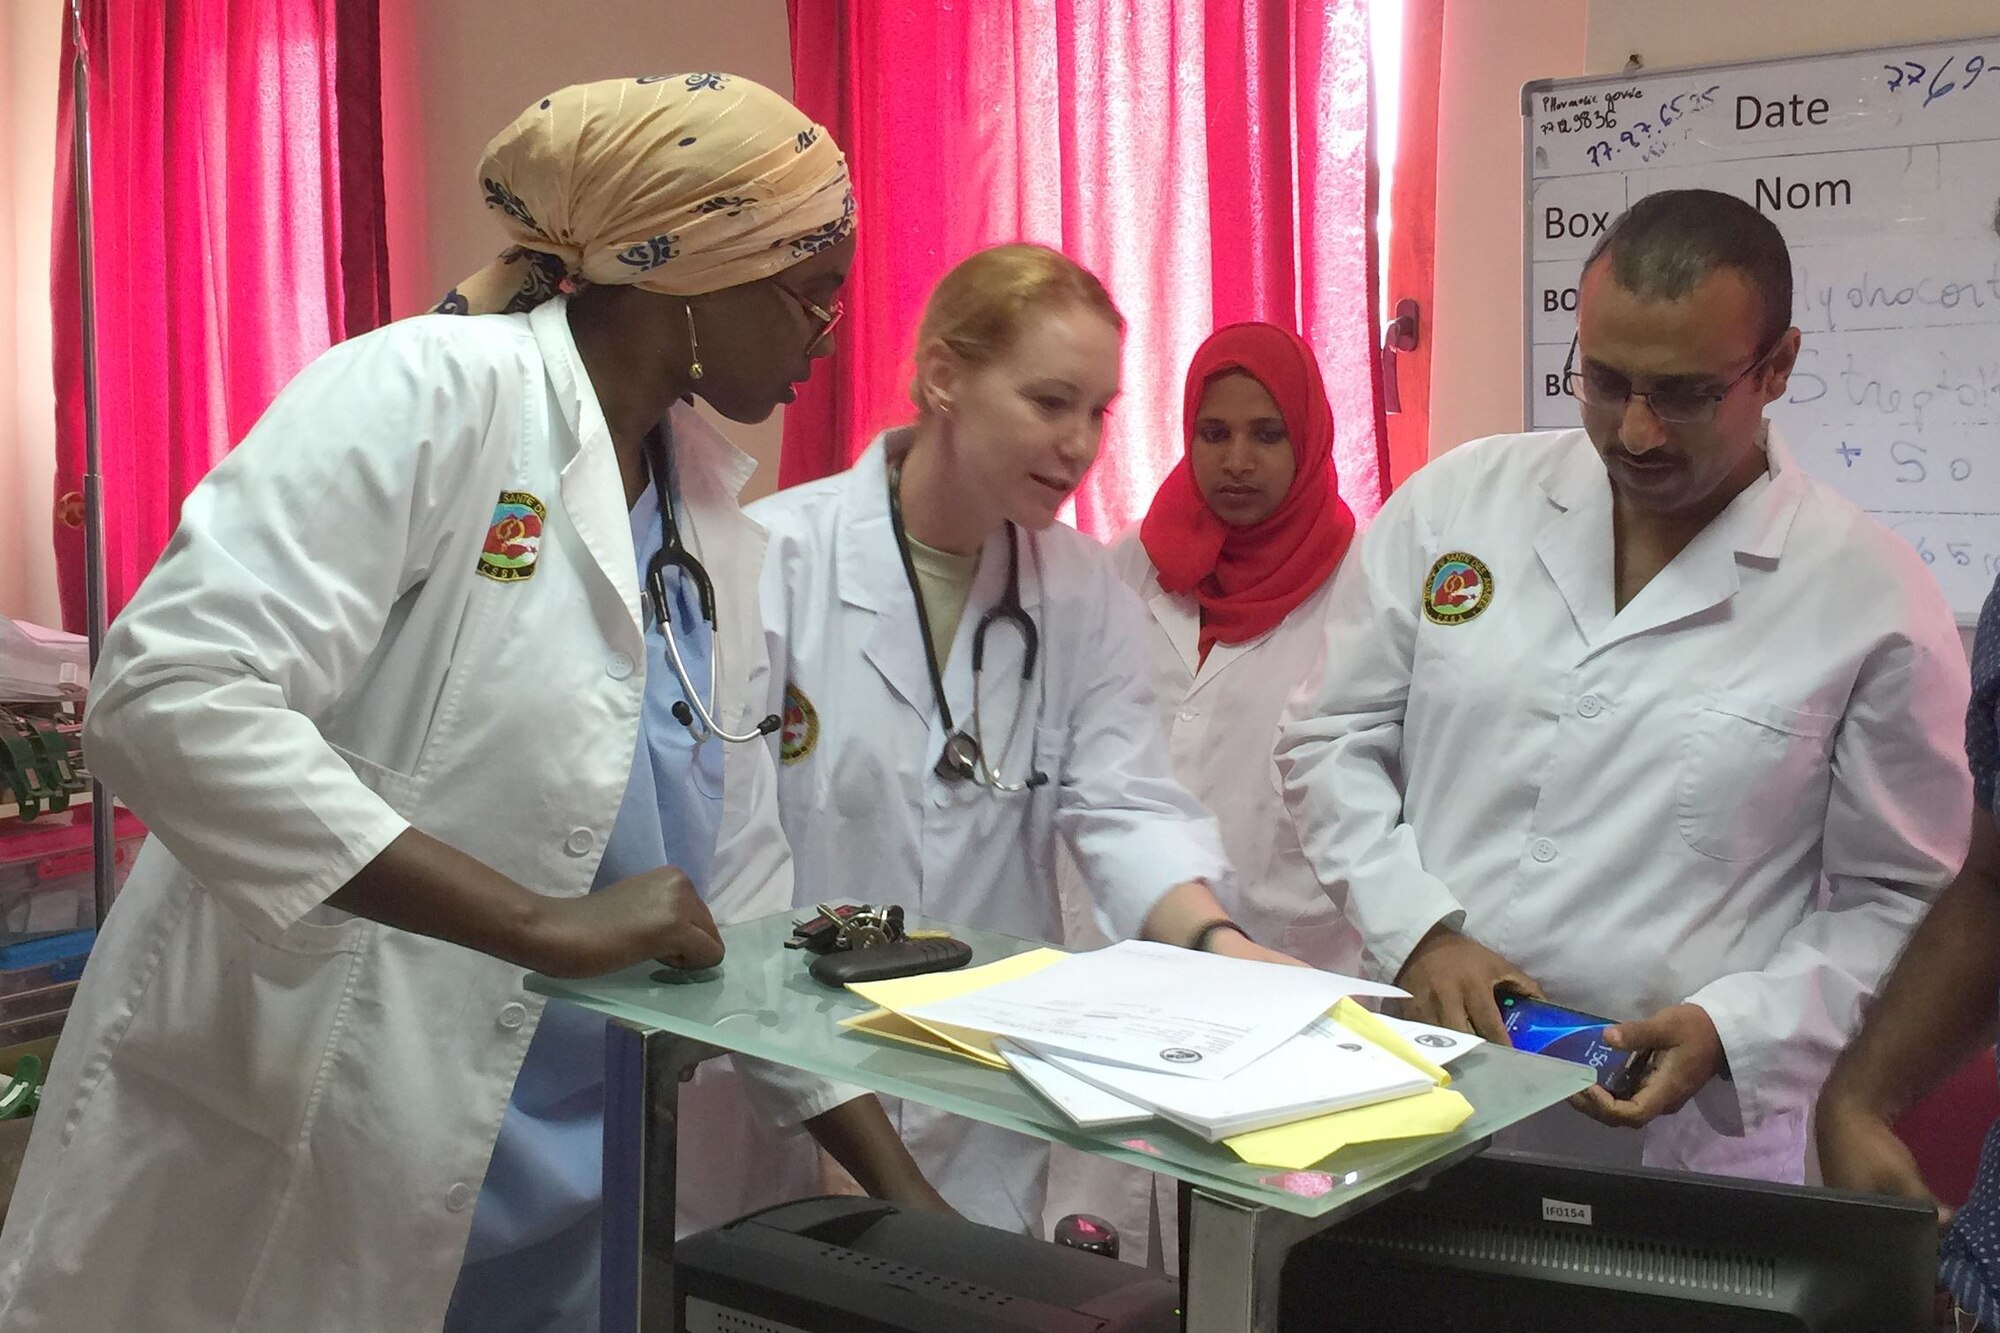 Maj. Brandi Faudree (second from left), a physician assistant with the Kentucky Air National Guard’s 123rd Medical Group in Louisville, Ky., reads electrocardiograms with cardiologists and emergency department physicians at Omar Hassan A. Al Bashir Hospital in Djibouti City, Djibouti, March 11, 2017. Faudree was one of three members of the Kentucky National Guard military medical engagement team that visited the hospital in support of the Kentucky State Partnership Program.